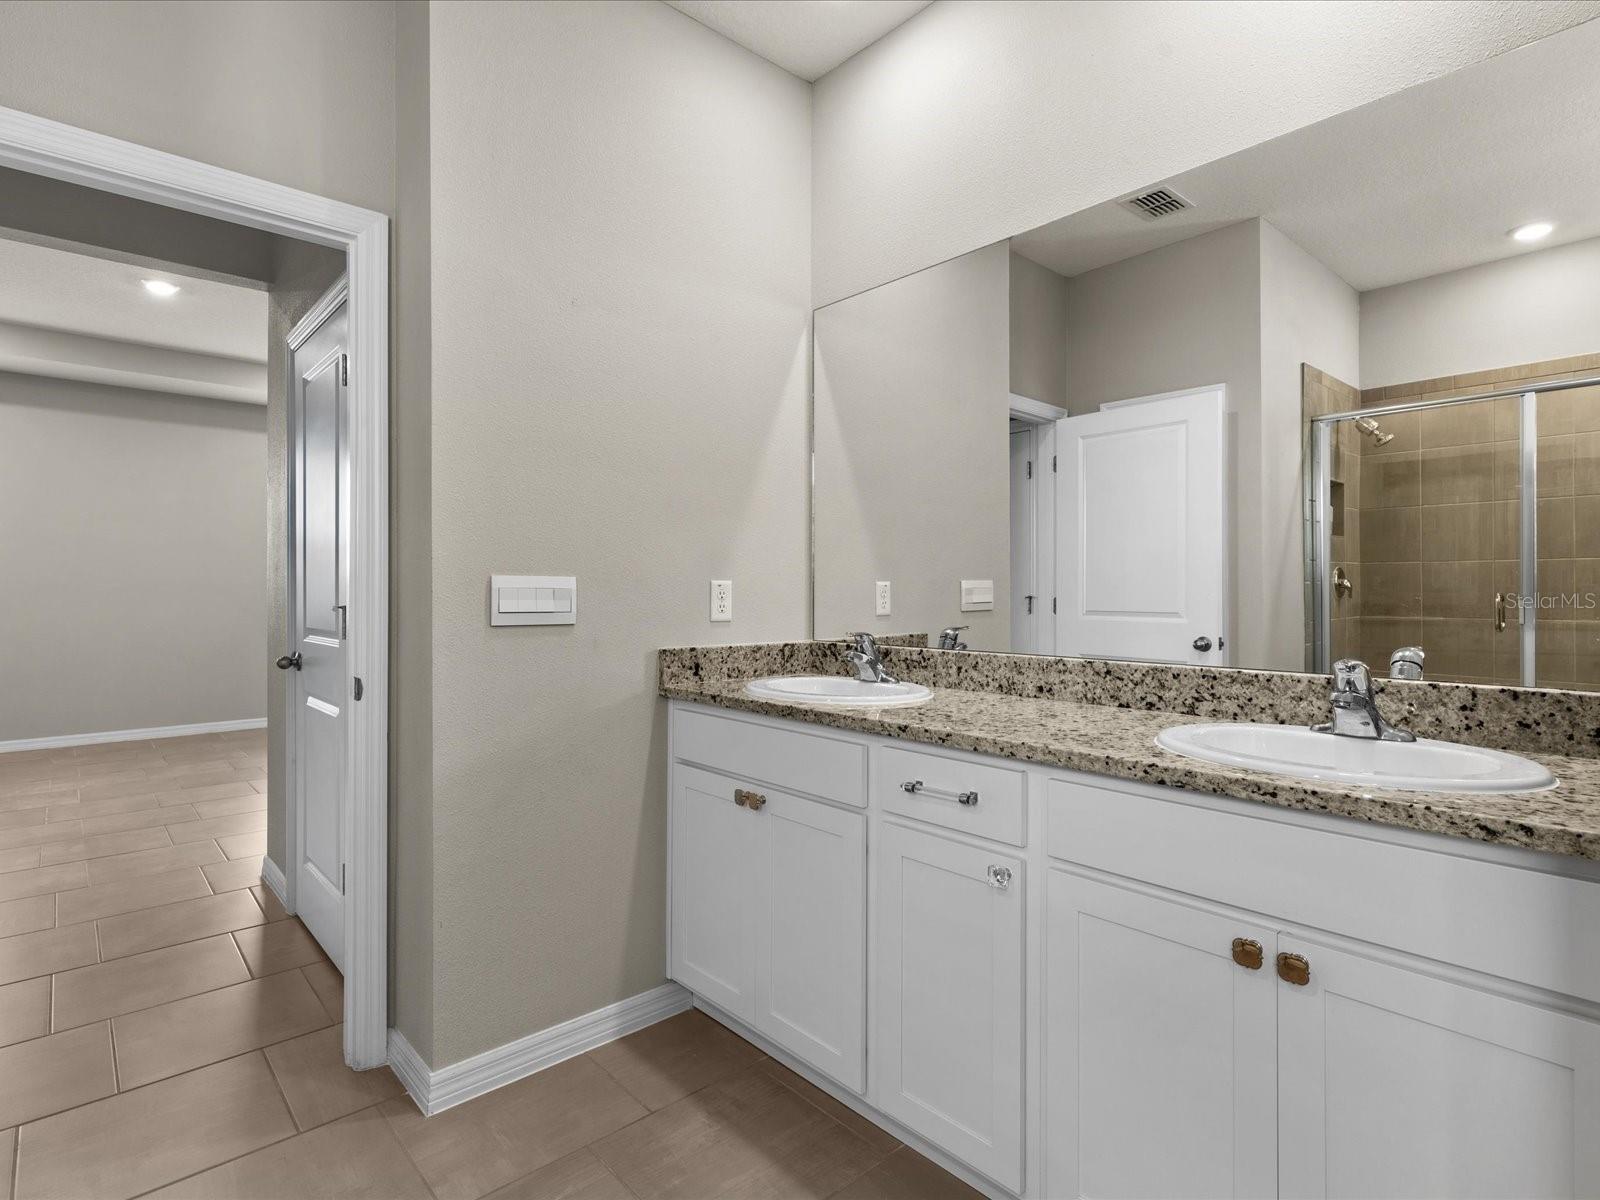 Primary Ensuity Bath featuring dual vanities and walk in closets